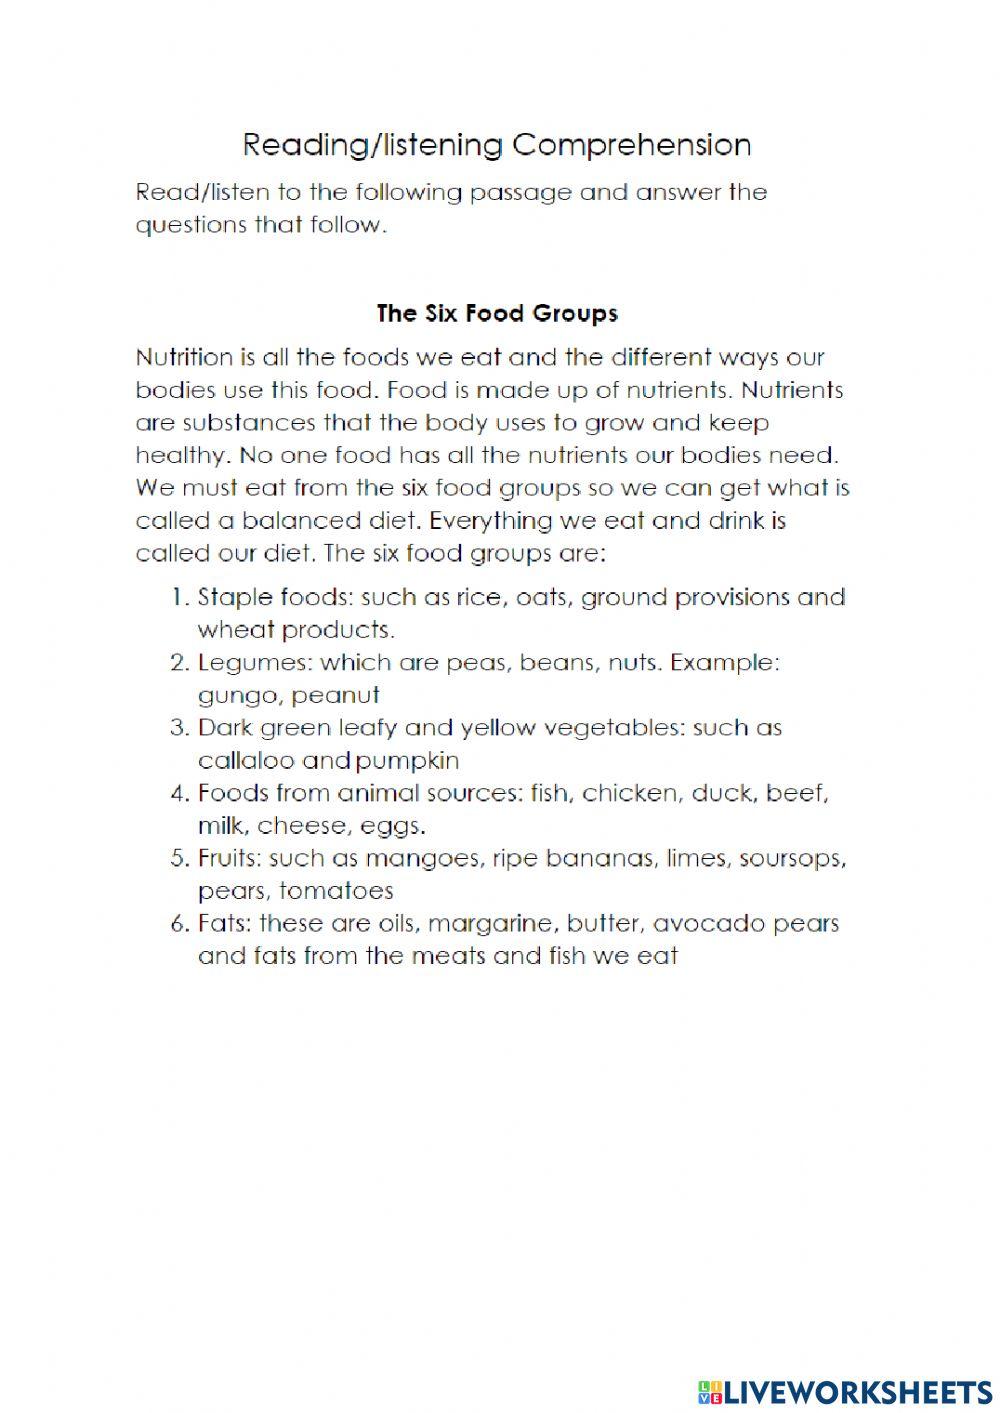 Food Group Reading Comprehension